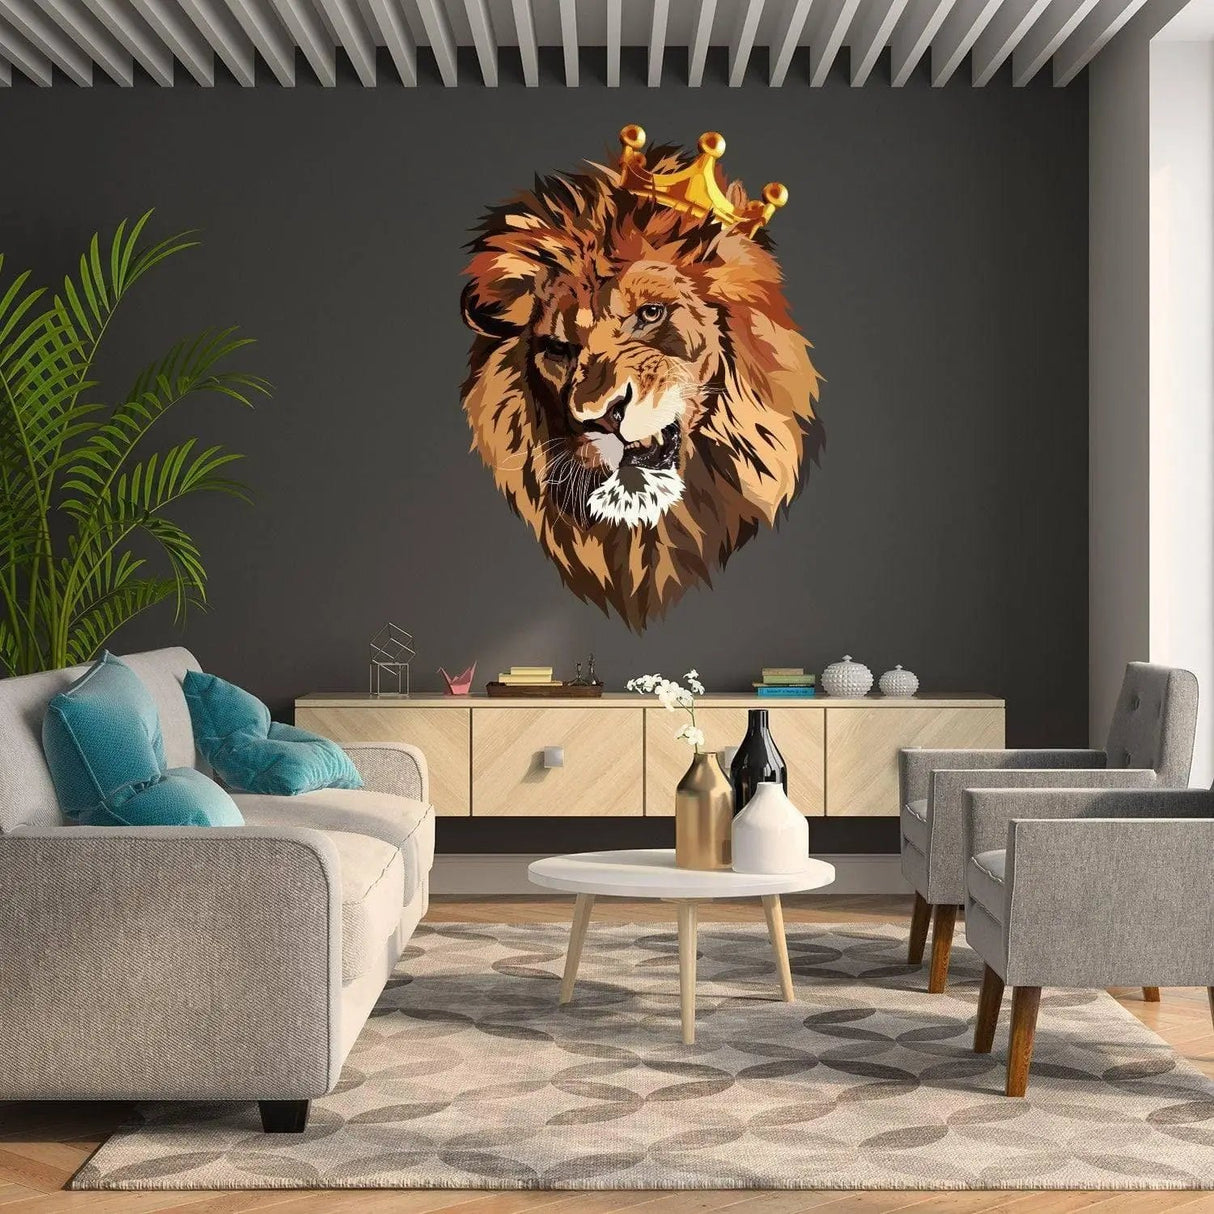 Lion King With Crown Vinyl Wall Sticker - Funny Lions Head Cut Seal Art Decal - Fun Silhouette Theme Wildlife Decoration Decor Print - Decords